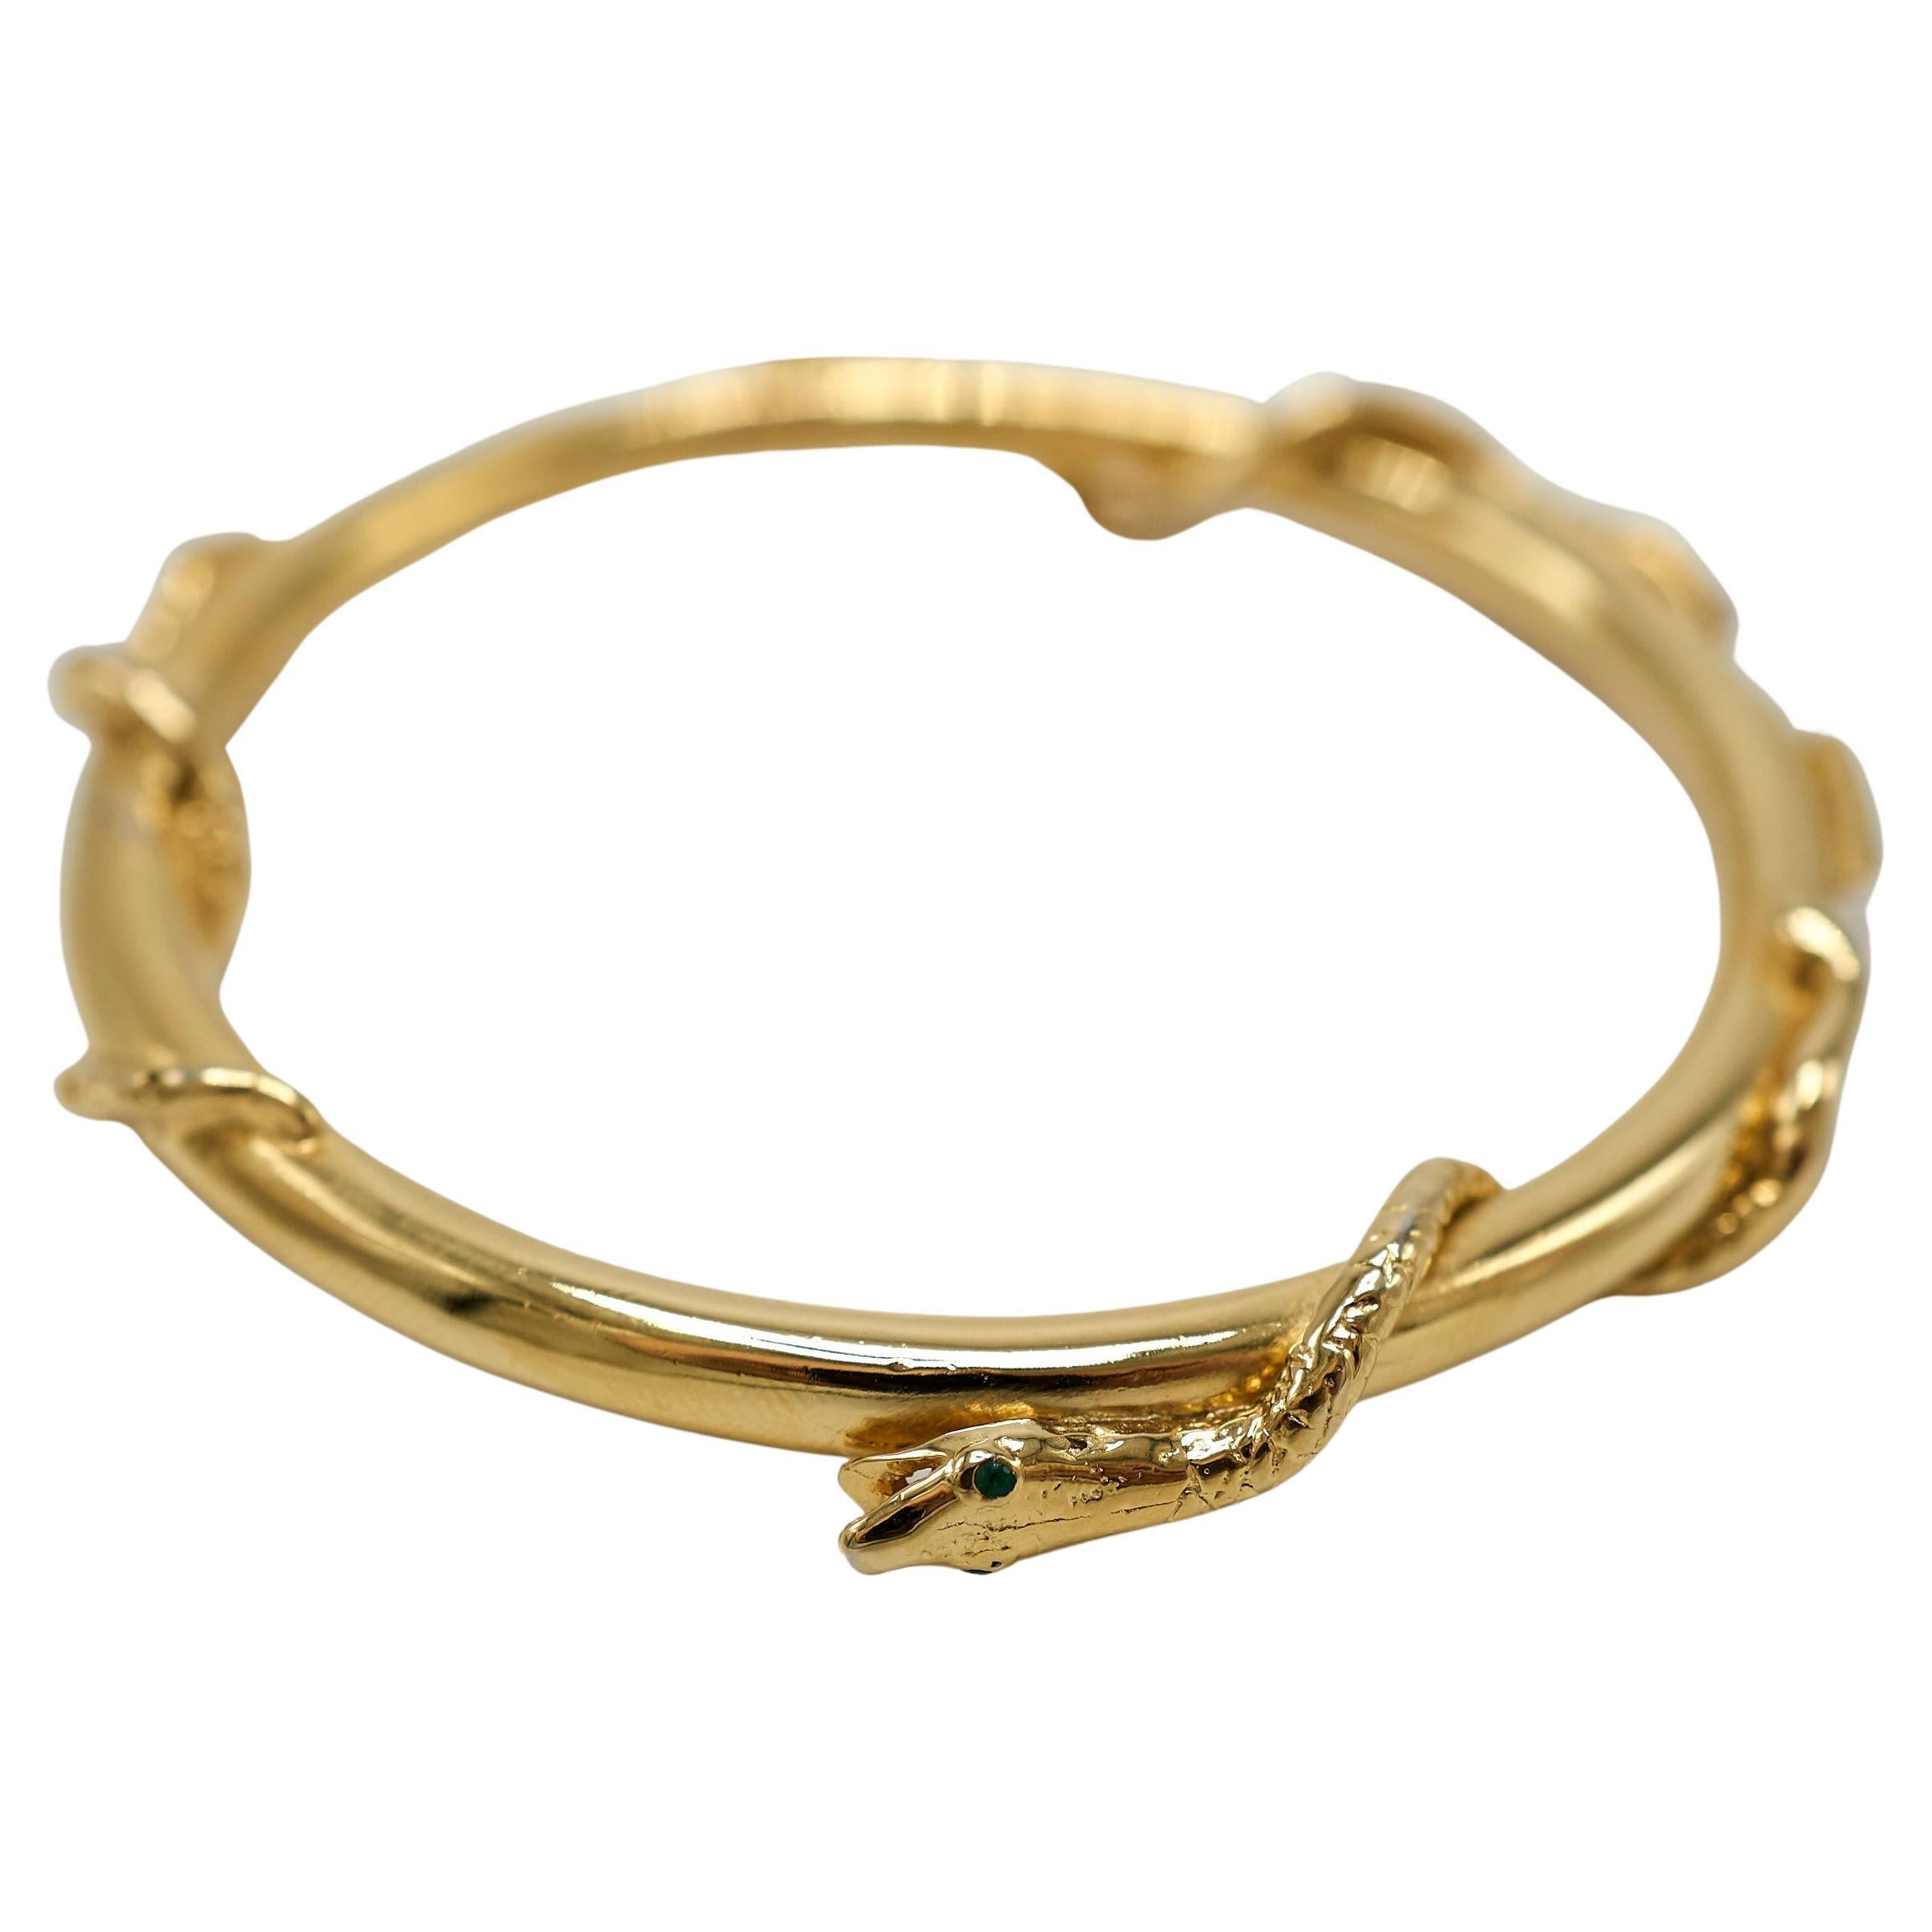 Three Snake Bangle Bracelet Gold Plated Animal jewelry J Dauphin

Historically, serpents and snakes represent fertility or a creative life force. As snakes shed their skin through sloughing, they are symbols of rebirth, transformation, immortality,